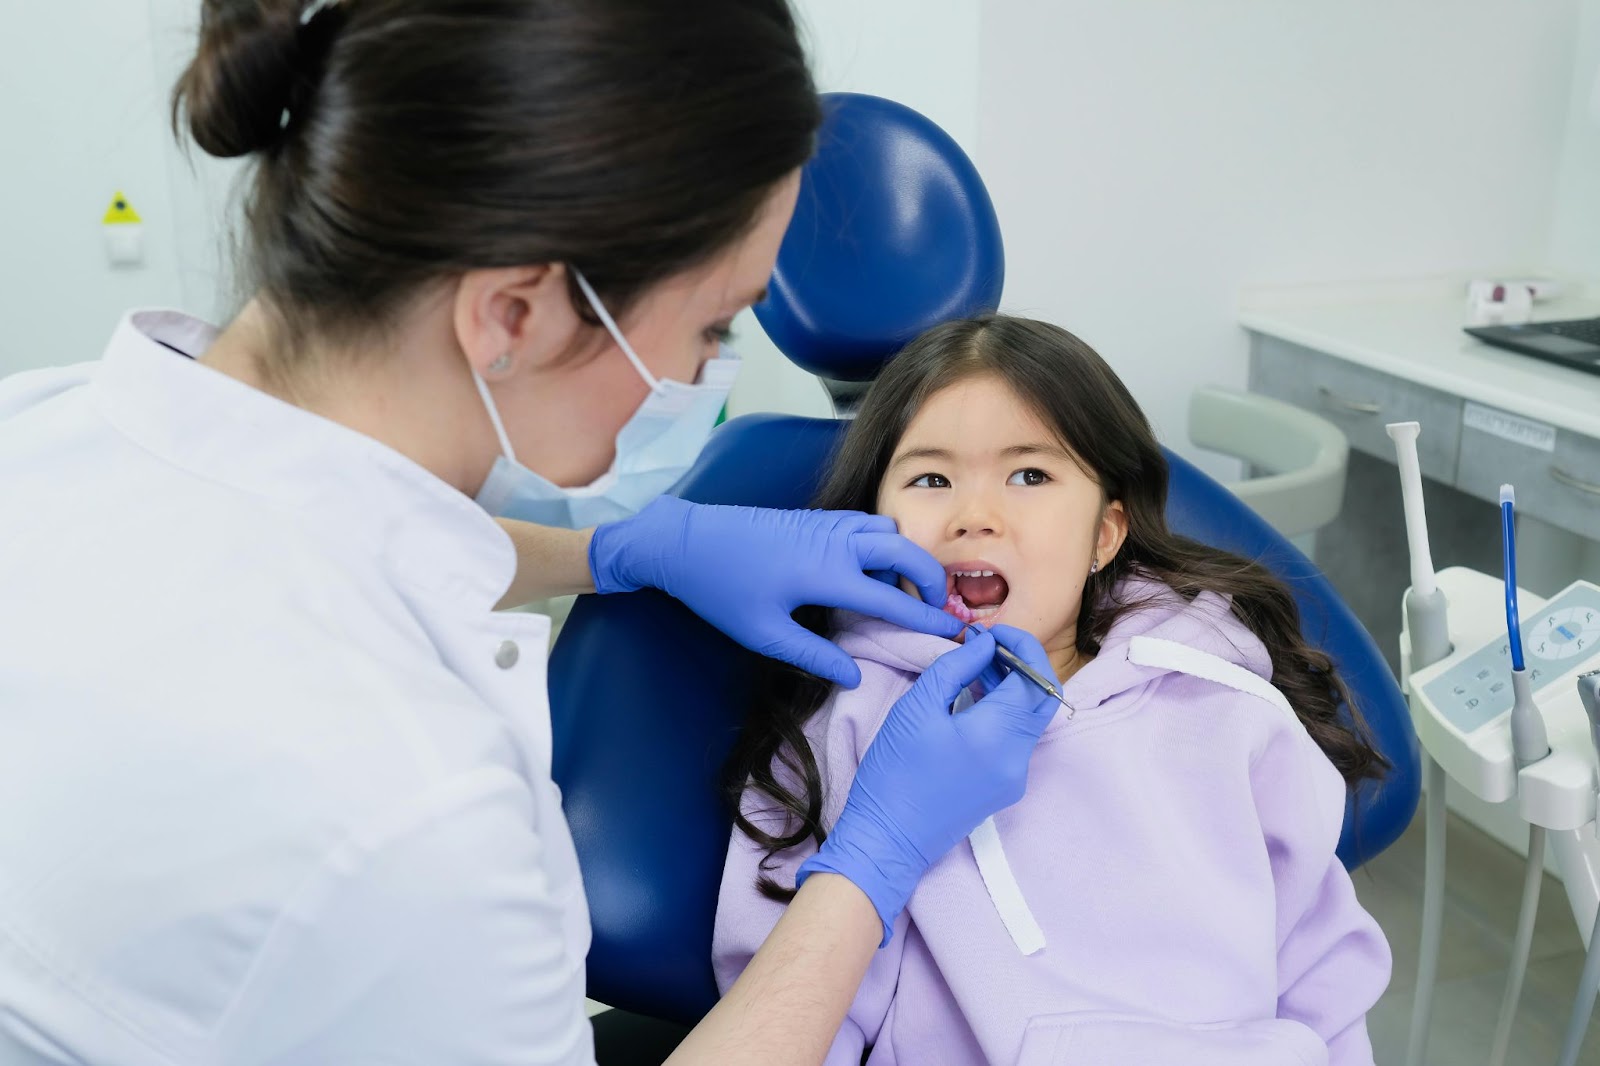 Dental hygienist delicately cleaning child's teeth in a blue chair.